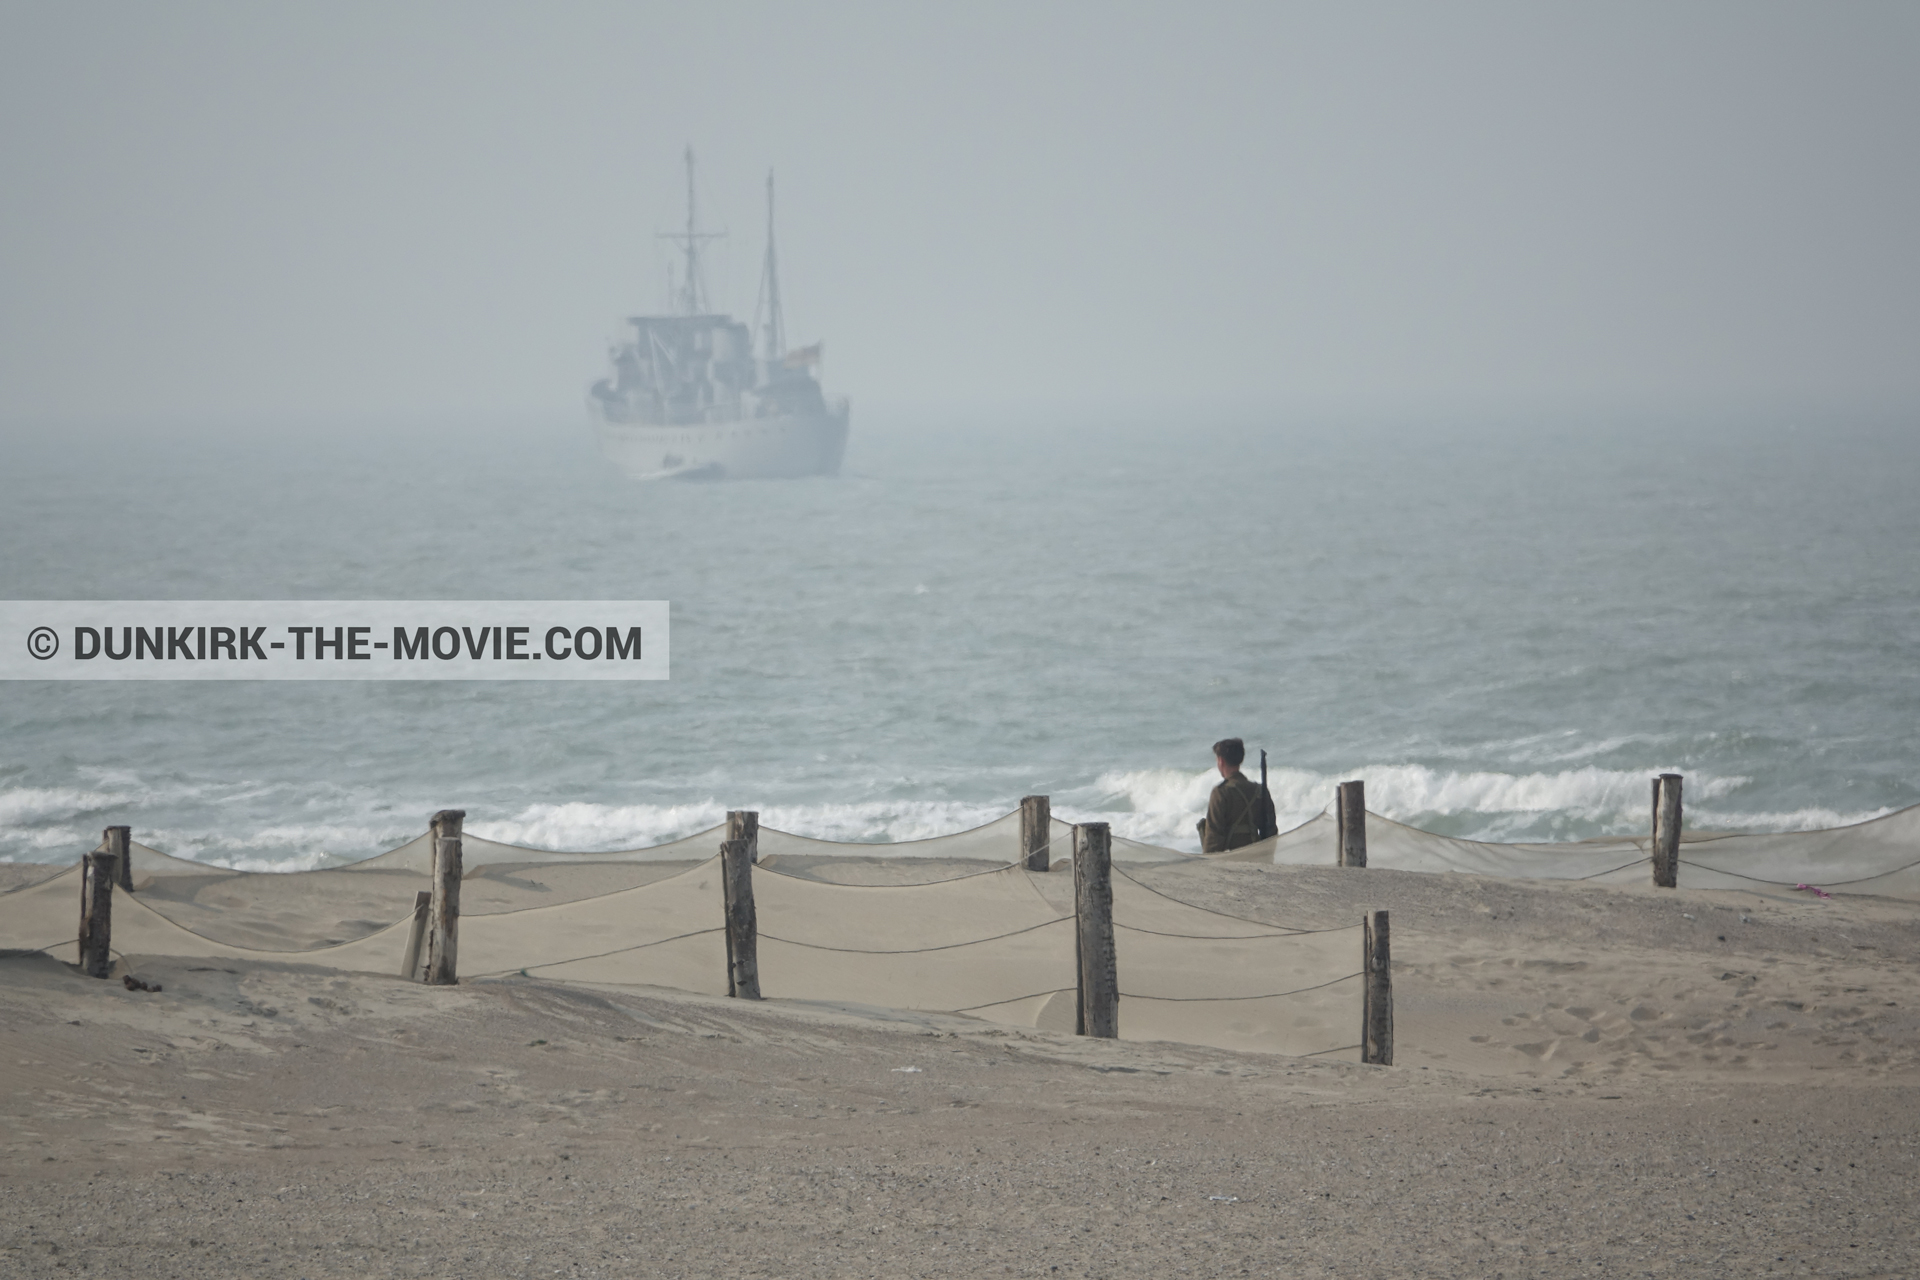 Picture with boat, grey sky, supernumeraries, rough sea, beach,  from behind the scene of the Dunkirk movie by Nolan